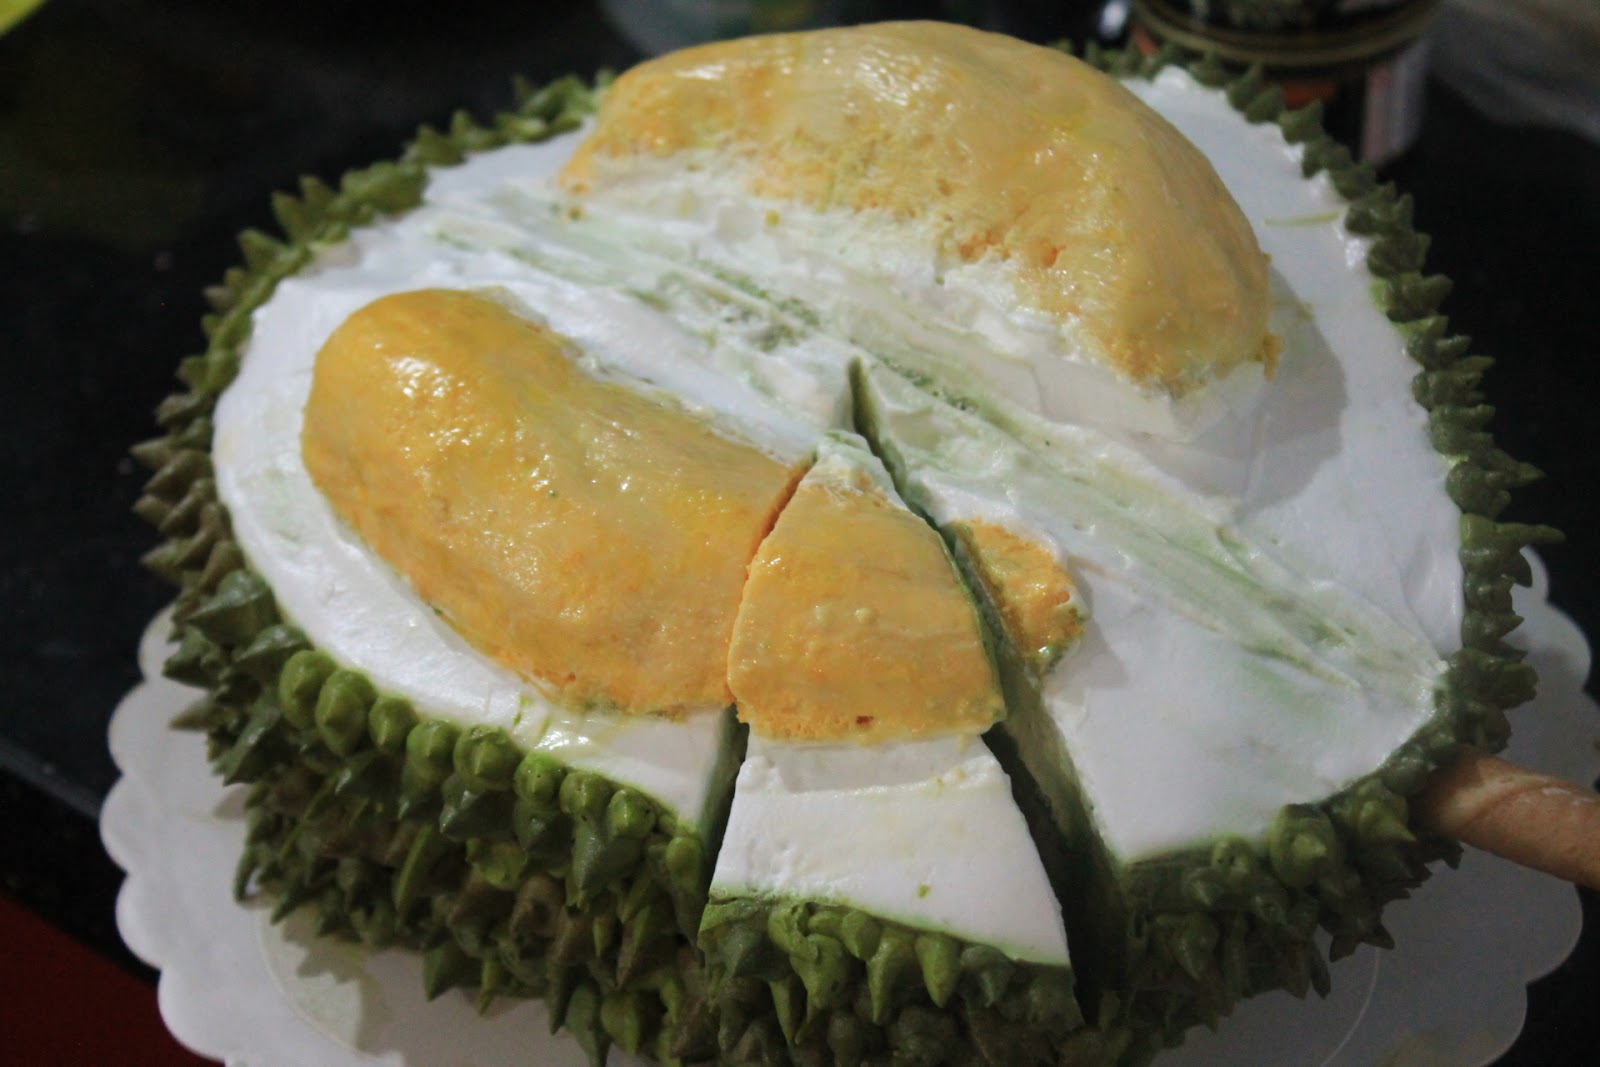 As The Deer : Durian Cendol Mousse Cake 榴莲煎堆慕斯蛋糕